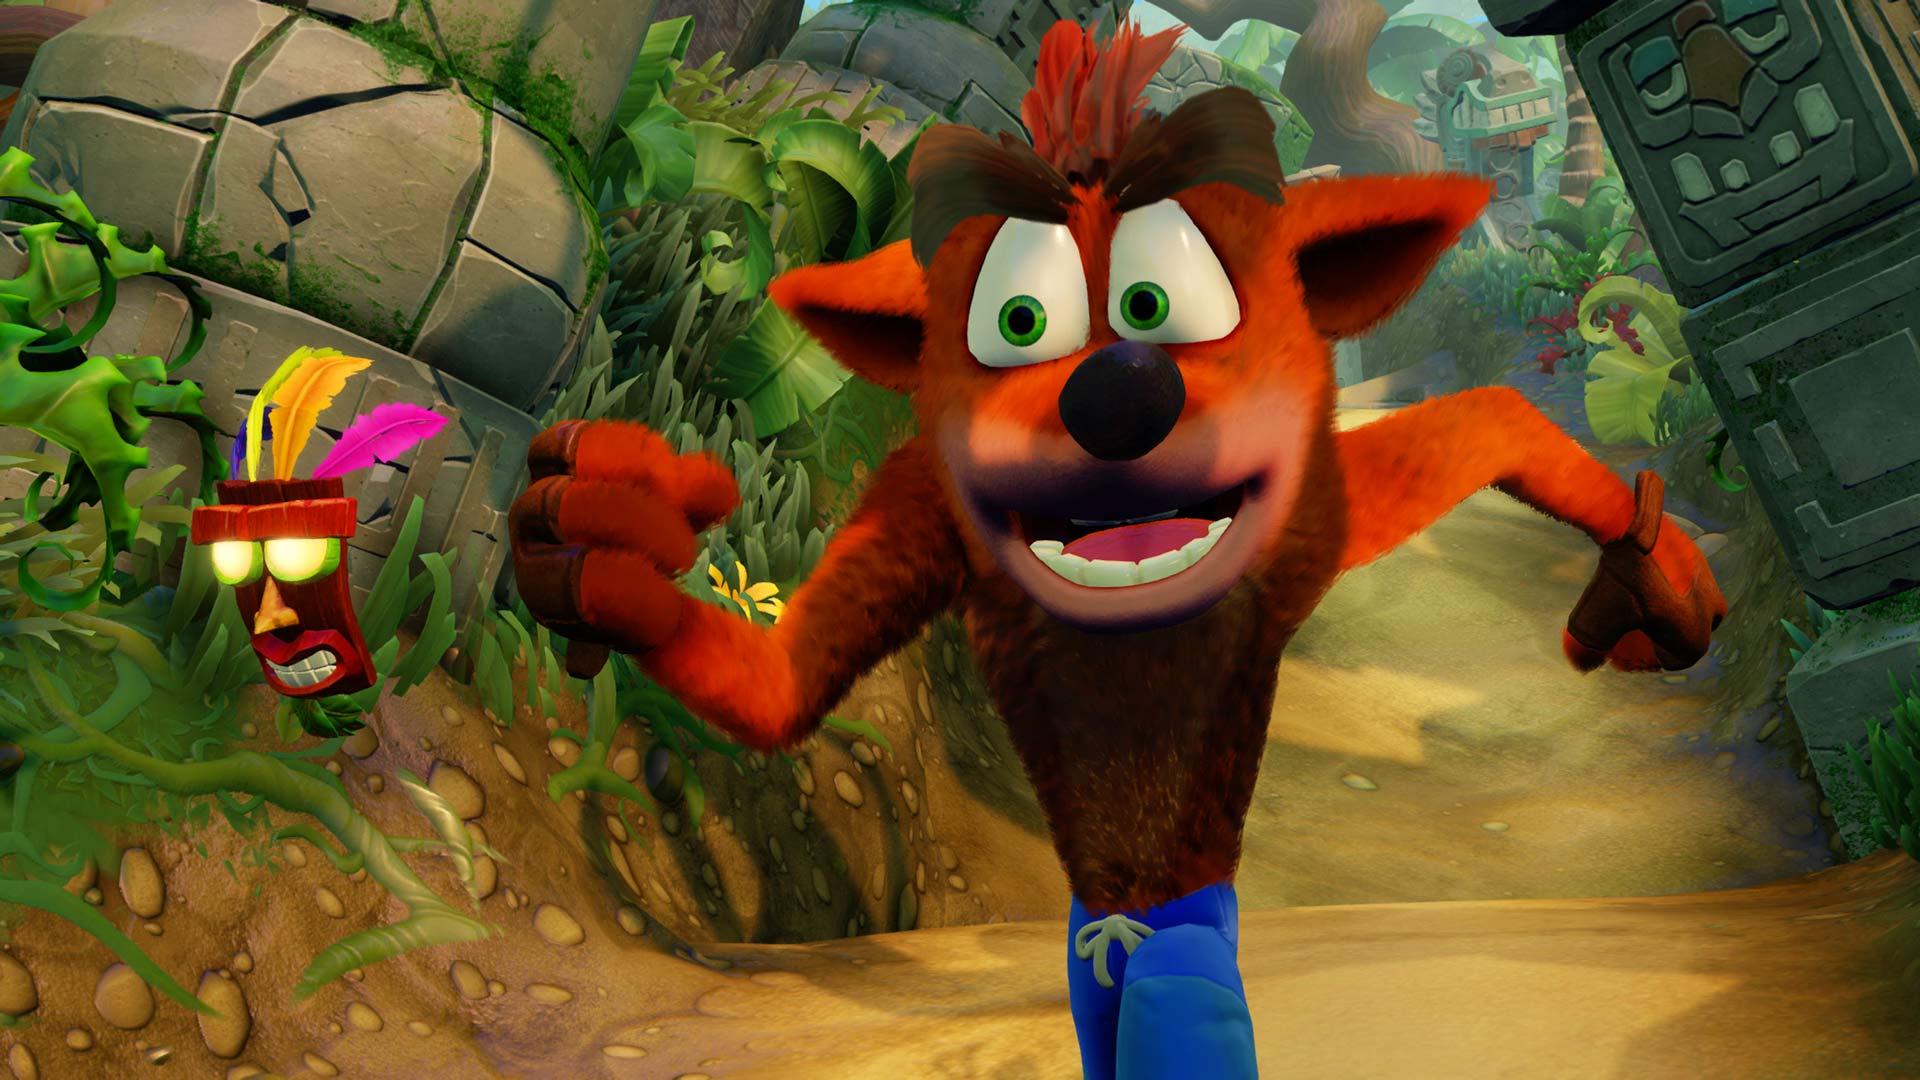 A Reimagined Version Of Crash Bandicoot Looks To Be Coming In 2019